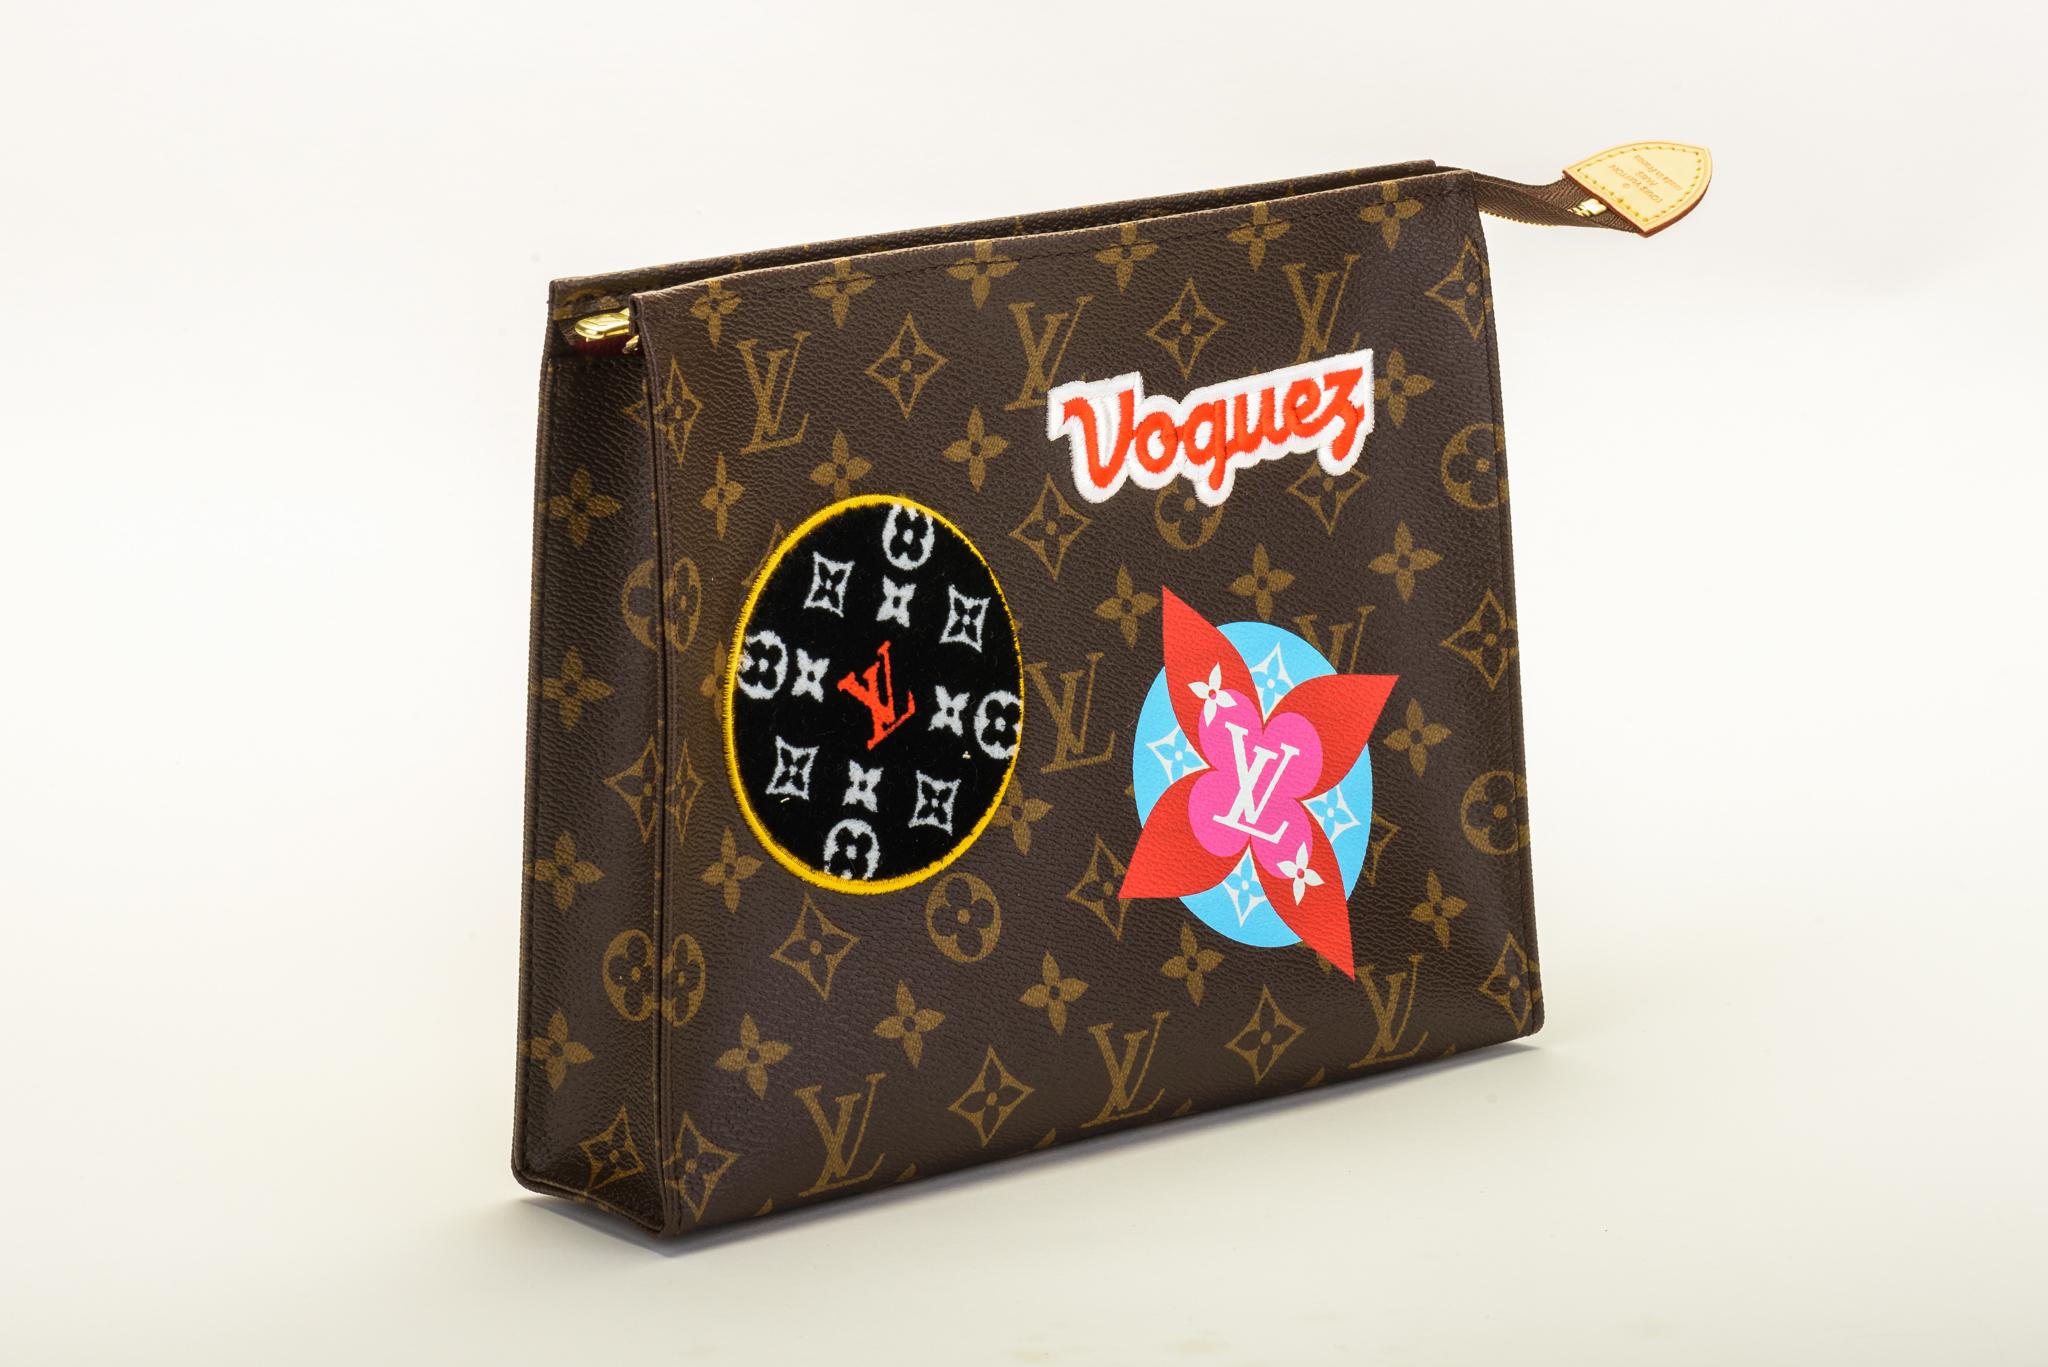 Louis Vuitton limited edition travel stickers pouchette. Sold out everywhere. Comes with dust cover and shopping bag. No box included. 